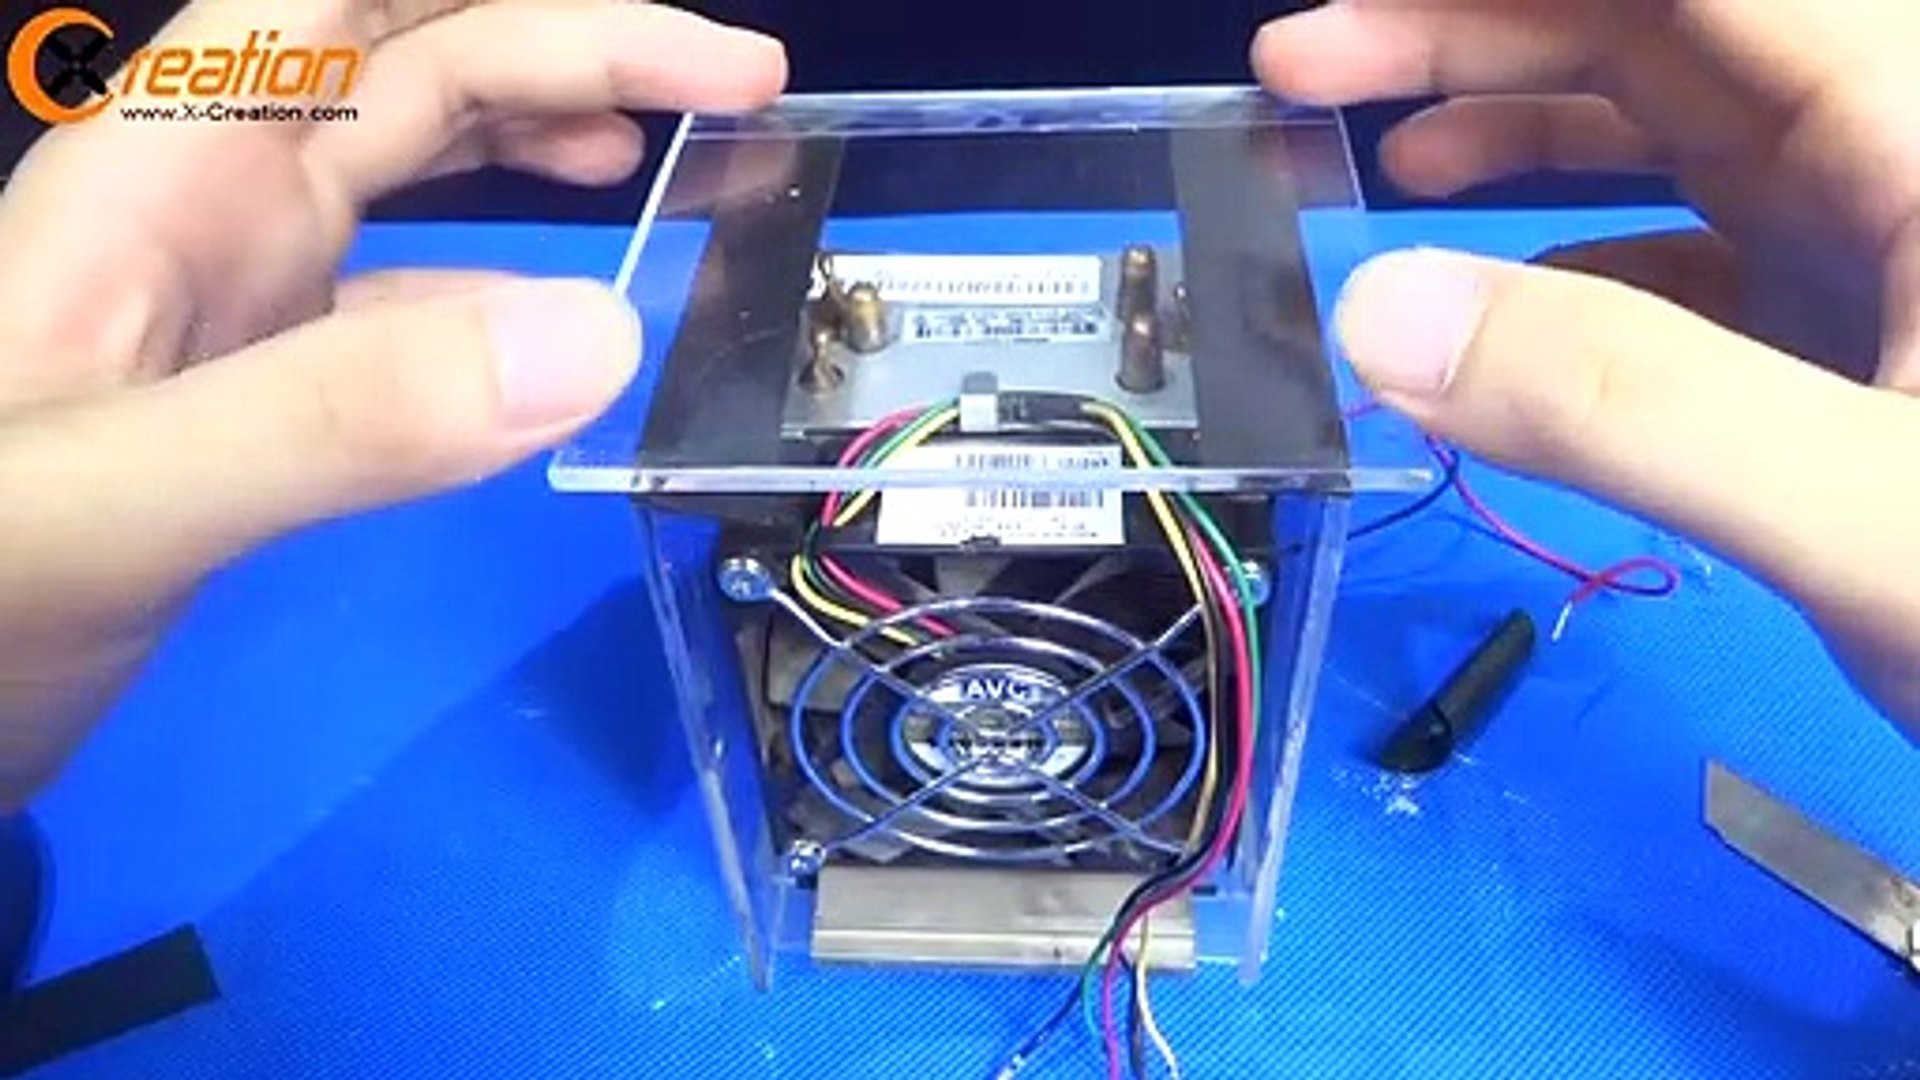 How To Make Air Conditioner Without Ice Simple Homemade Invention Video Dailymotion